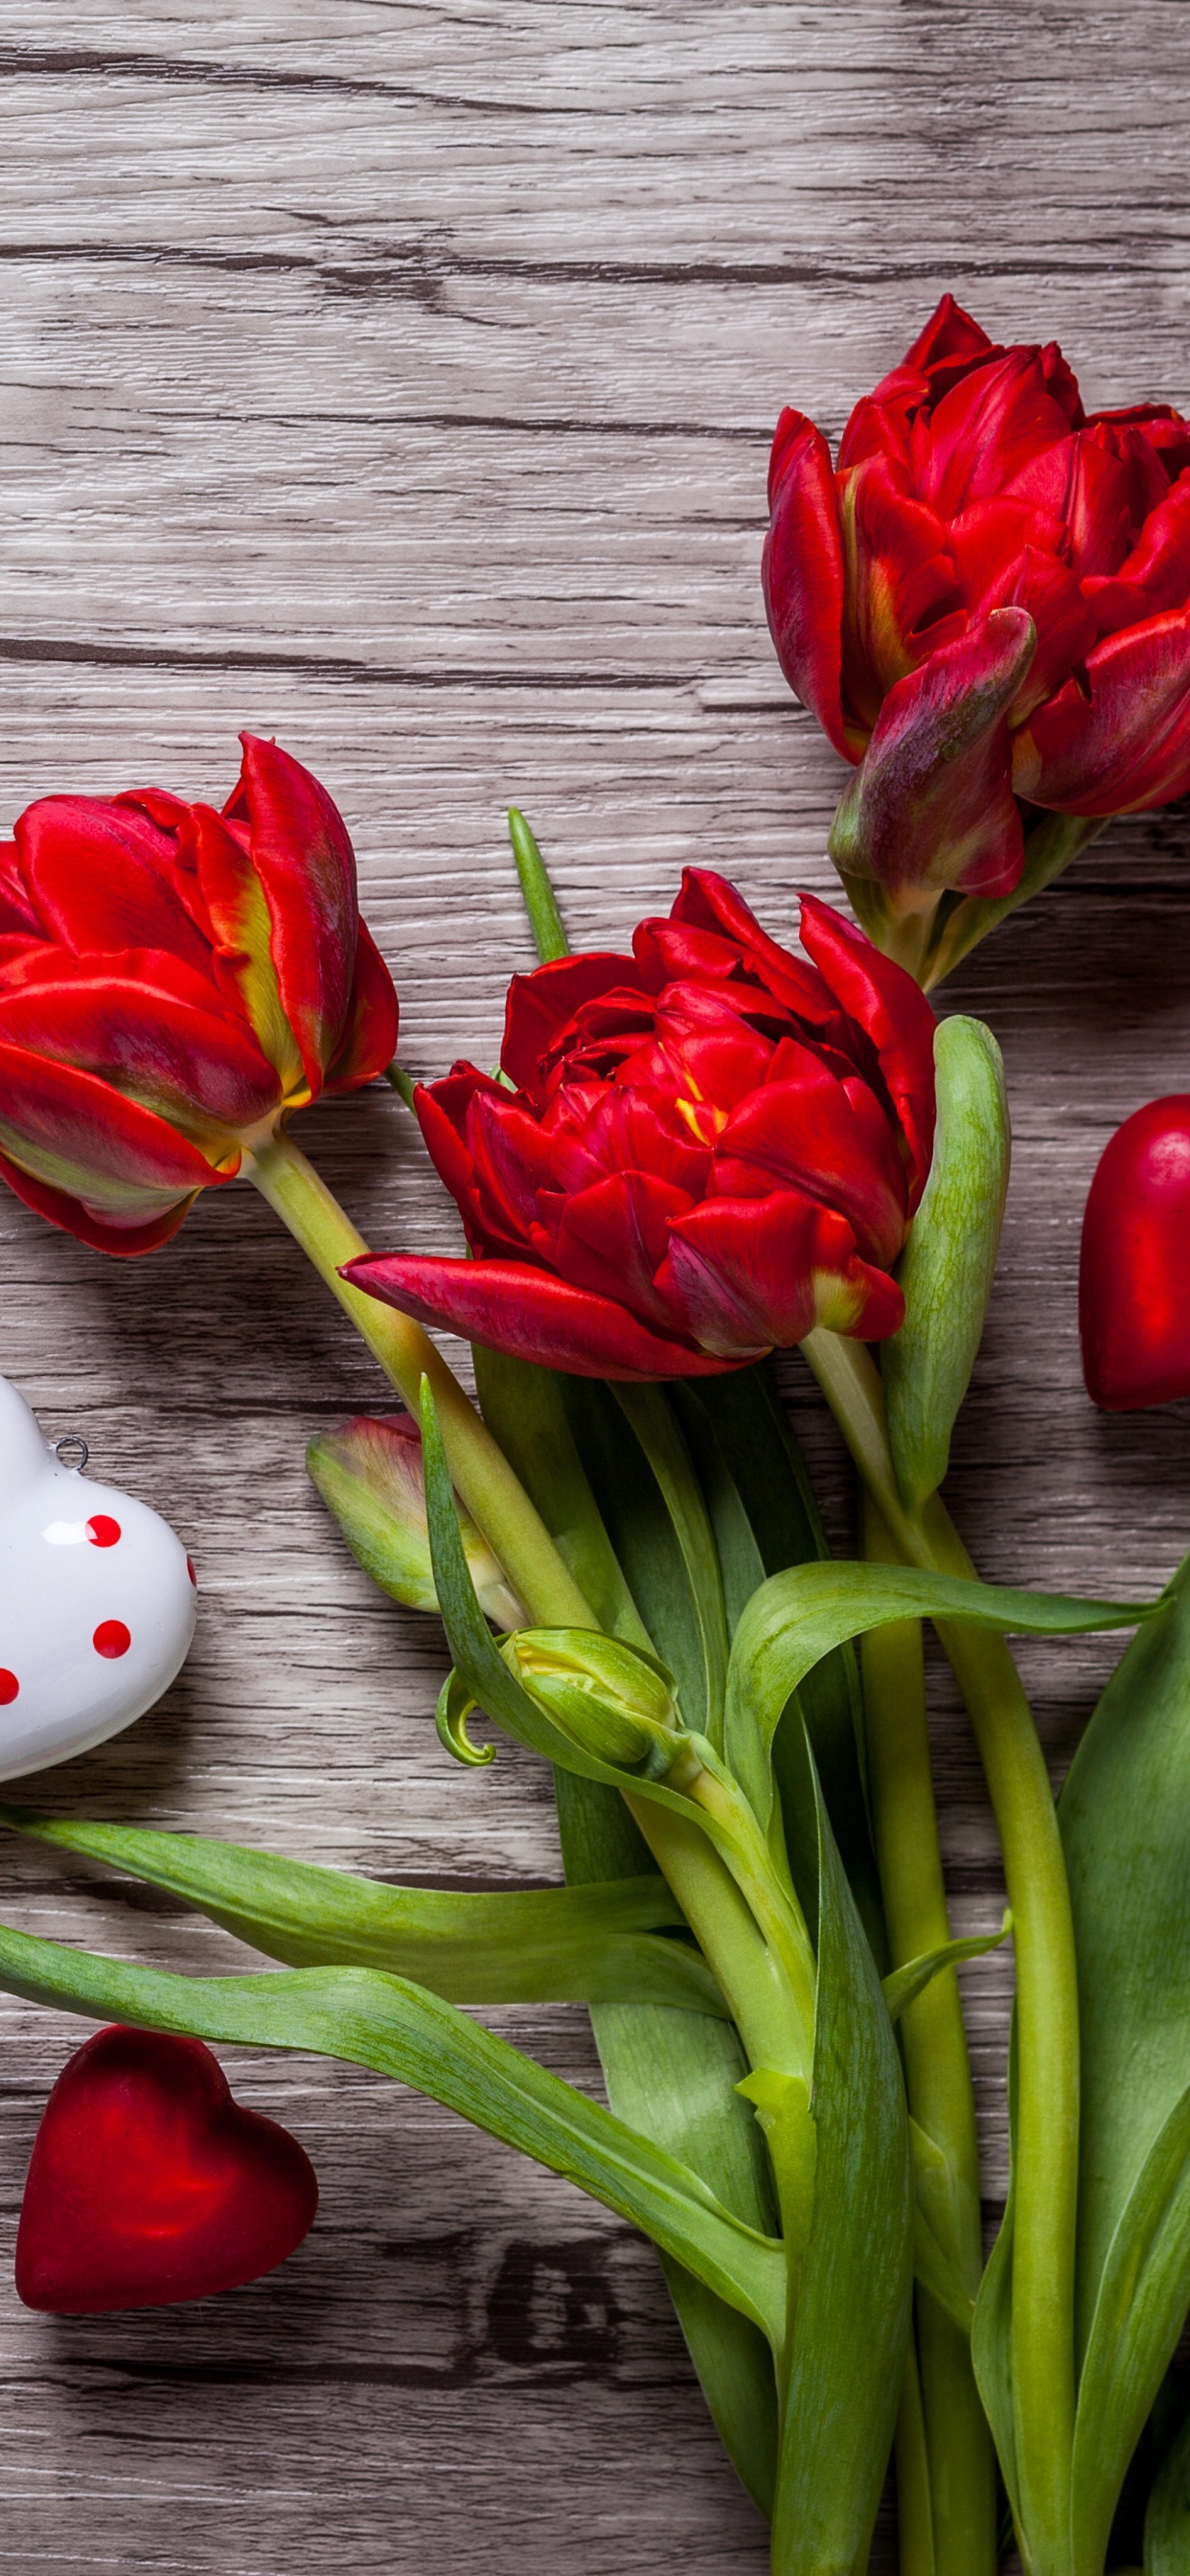 Red Tulips on Gray Wooden Surface. Wallpaper in 1242x2688 Resolution